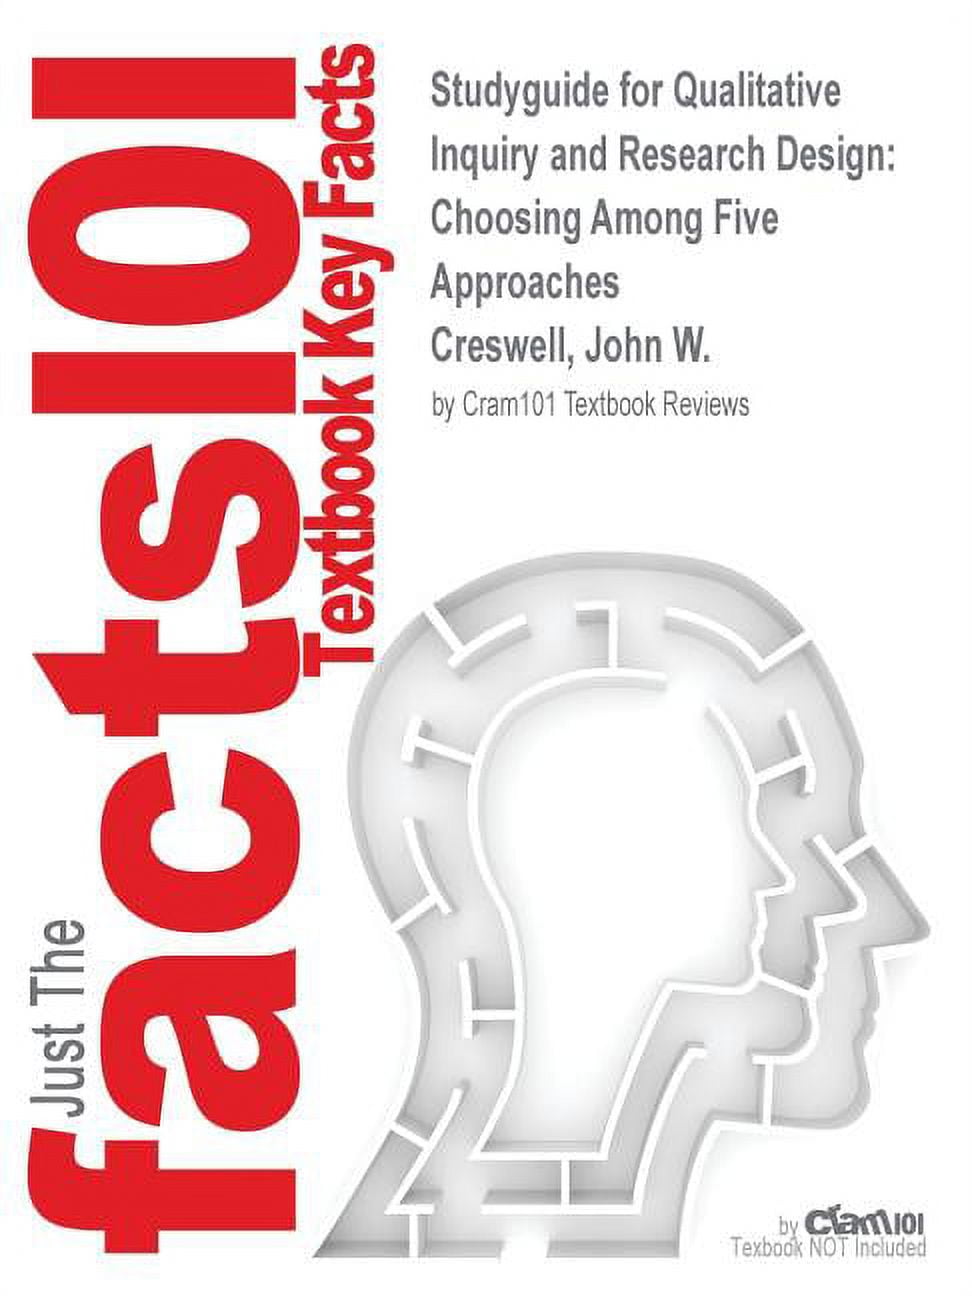 Among　Approaches　W.,　Research　Qualitative　John　Creswell,　Choosing　Studyguide　(Paperback)　Five　and　Design　for　Inquiry　9781452255811　by　ISBN